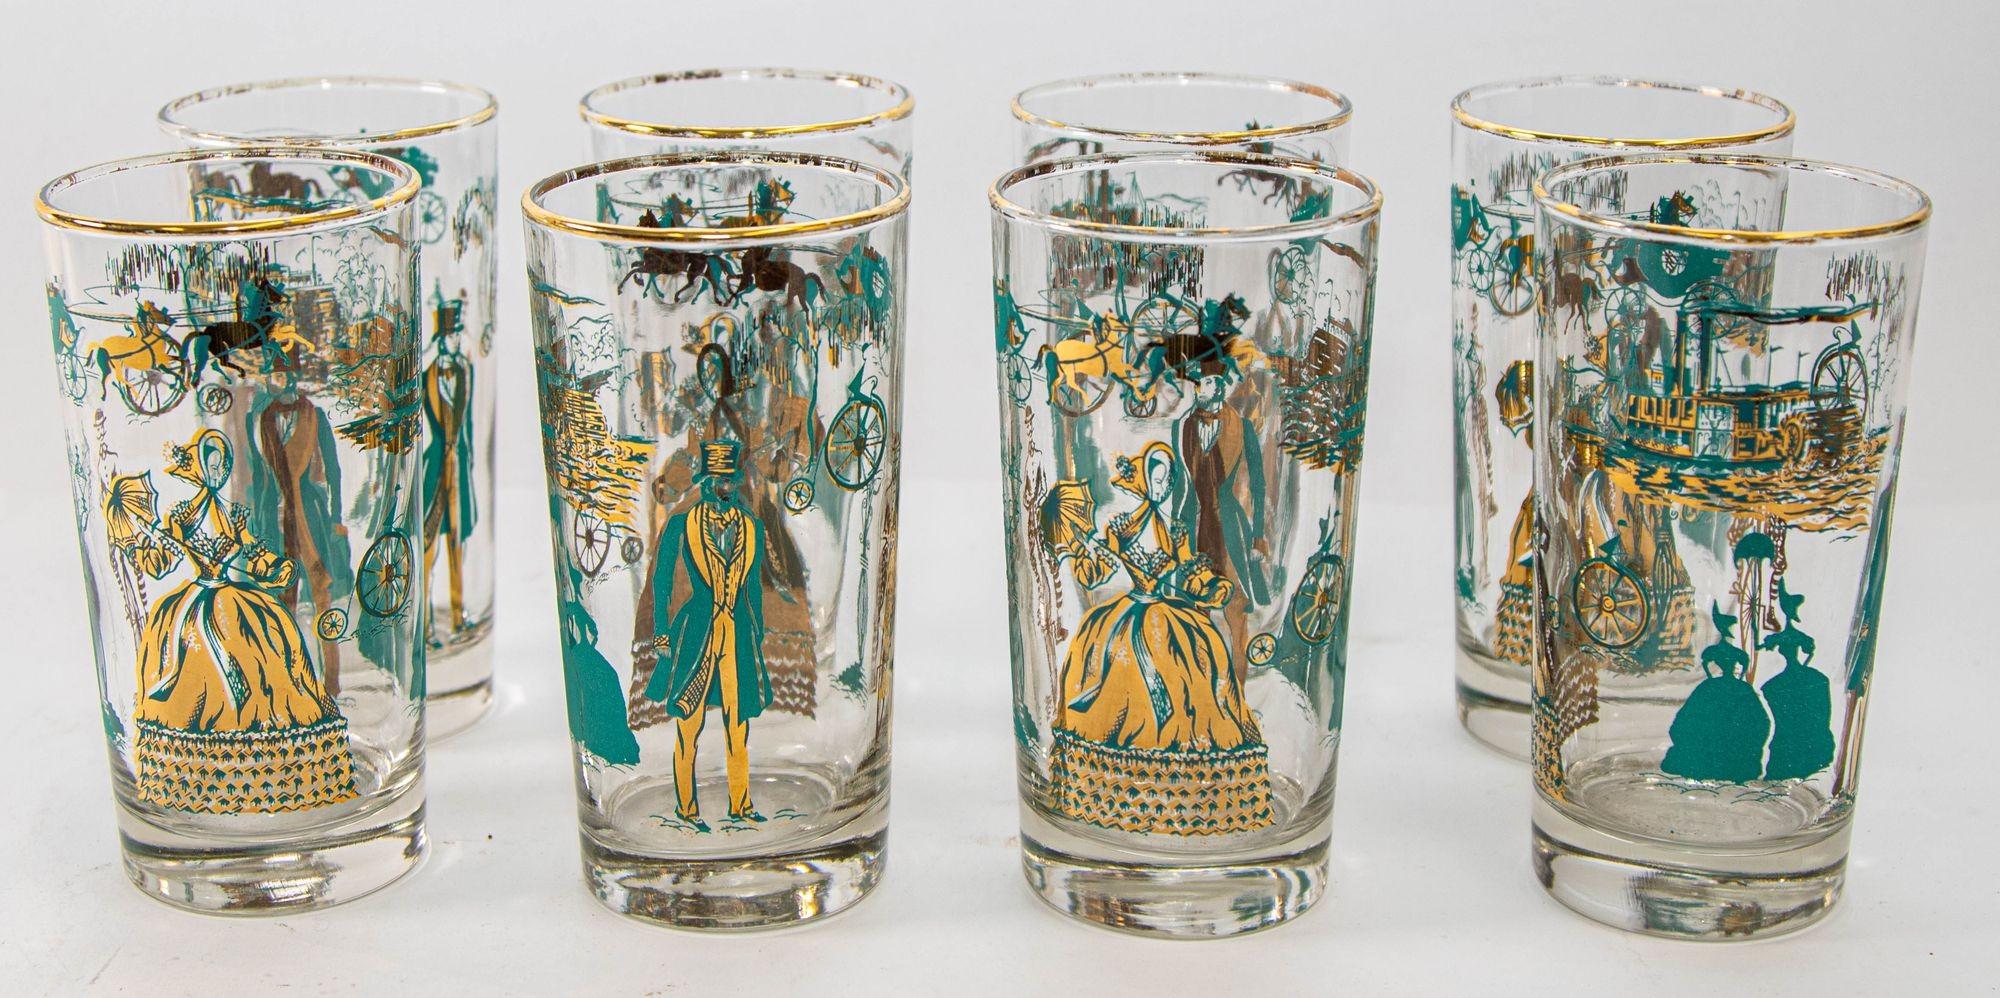 https://a.1stdibscdn.com/vintage-turquoise-and-gold-highball-barware-glasses-set-of-8-circa-1960-for-sale-picture-2/f_9068/f_348871021687389875013/1_Vintage_Mid_century_modern_barware_set_of_barware_drinking_glasses_2_master.jpeg